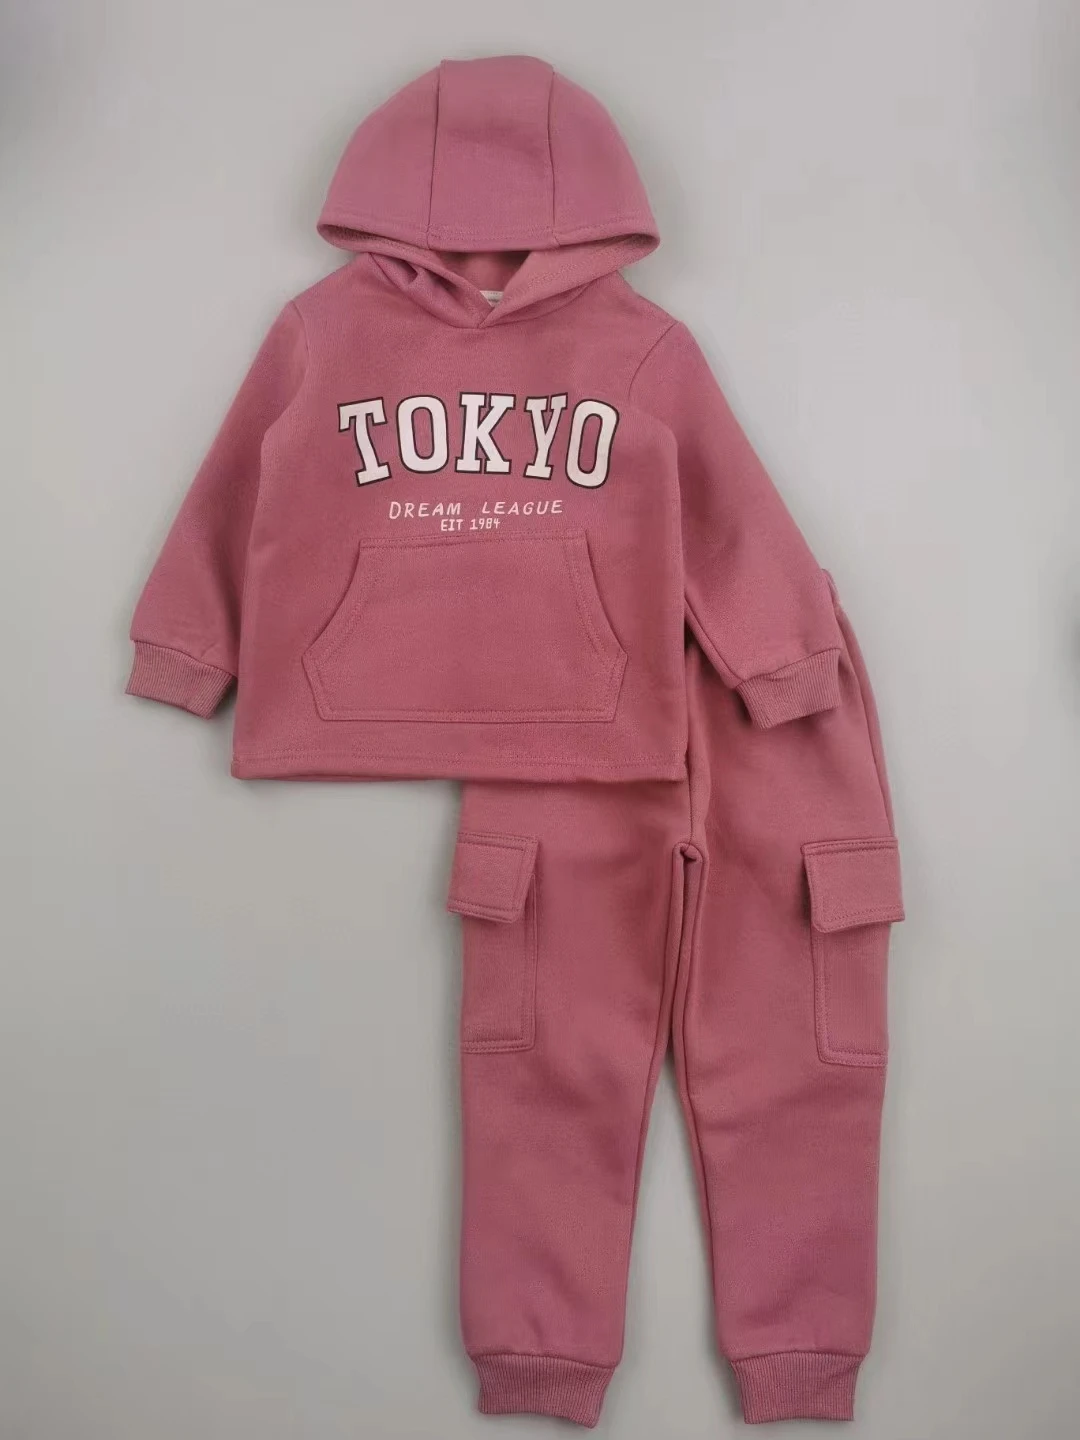 Kinder Kleidung Children Clothing Sets Winter Hoodies Sets Two Piece ...